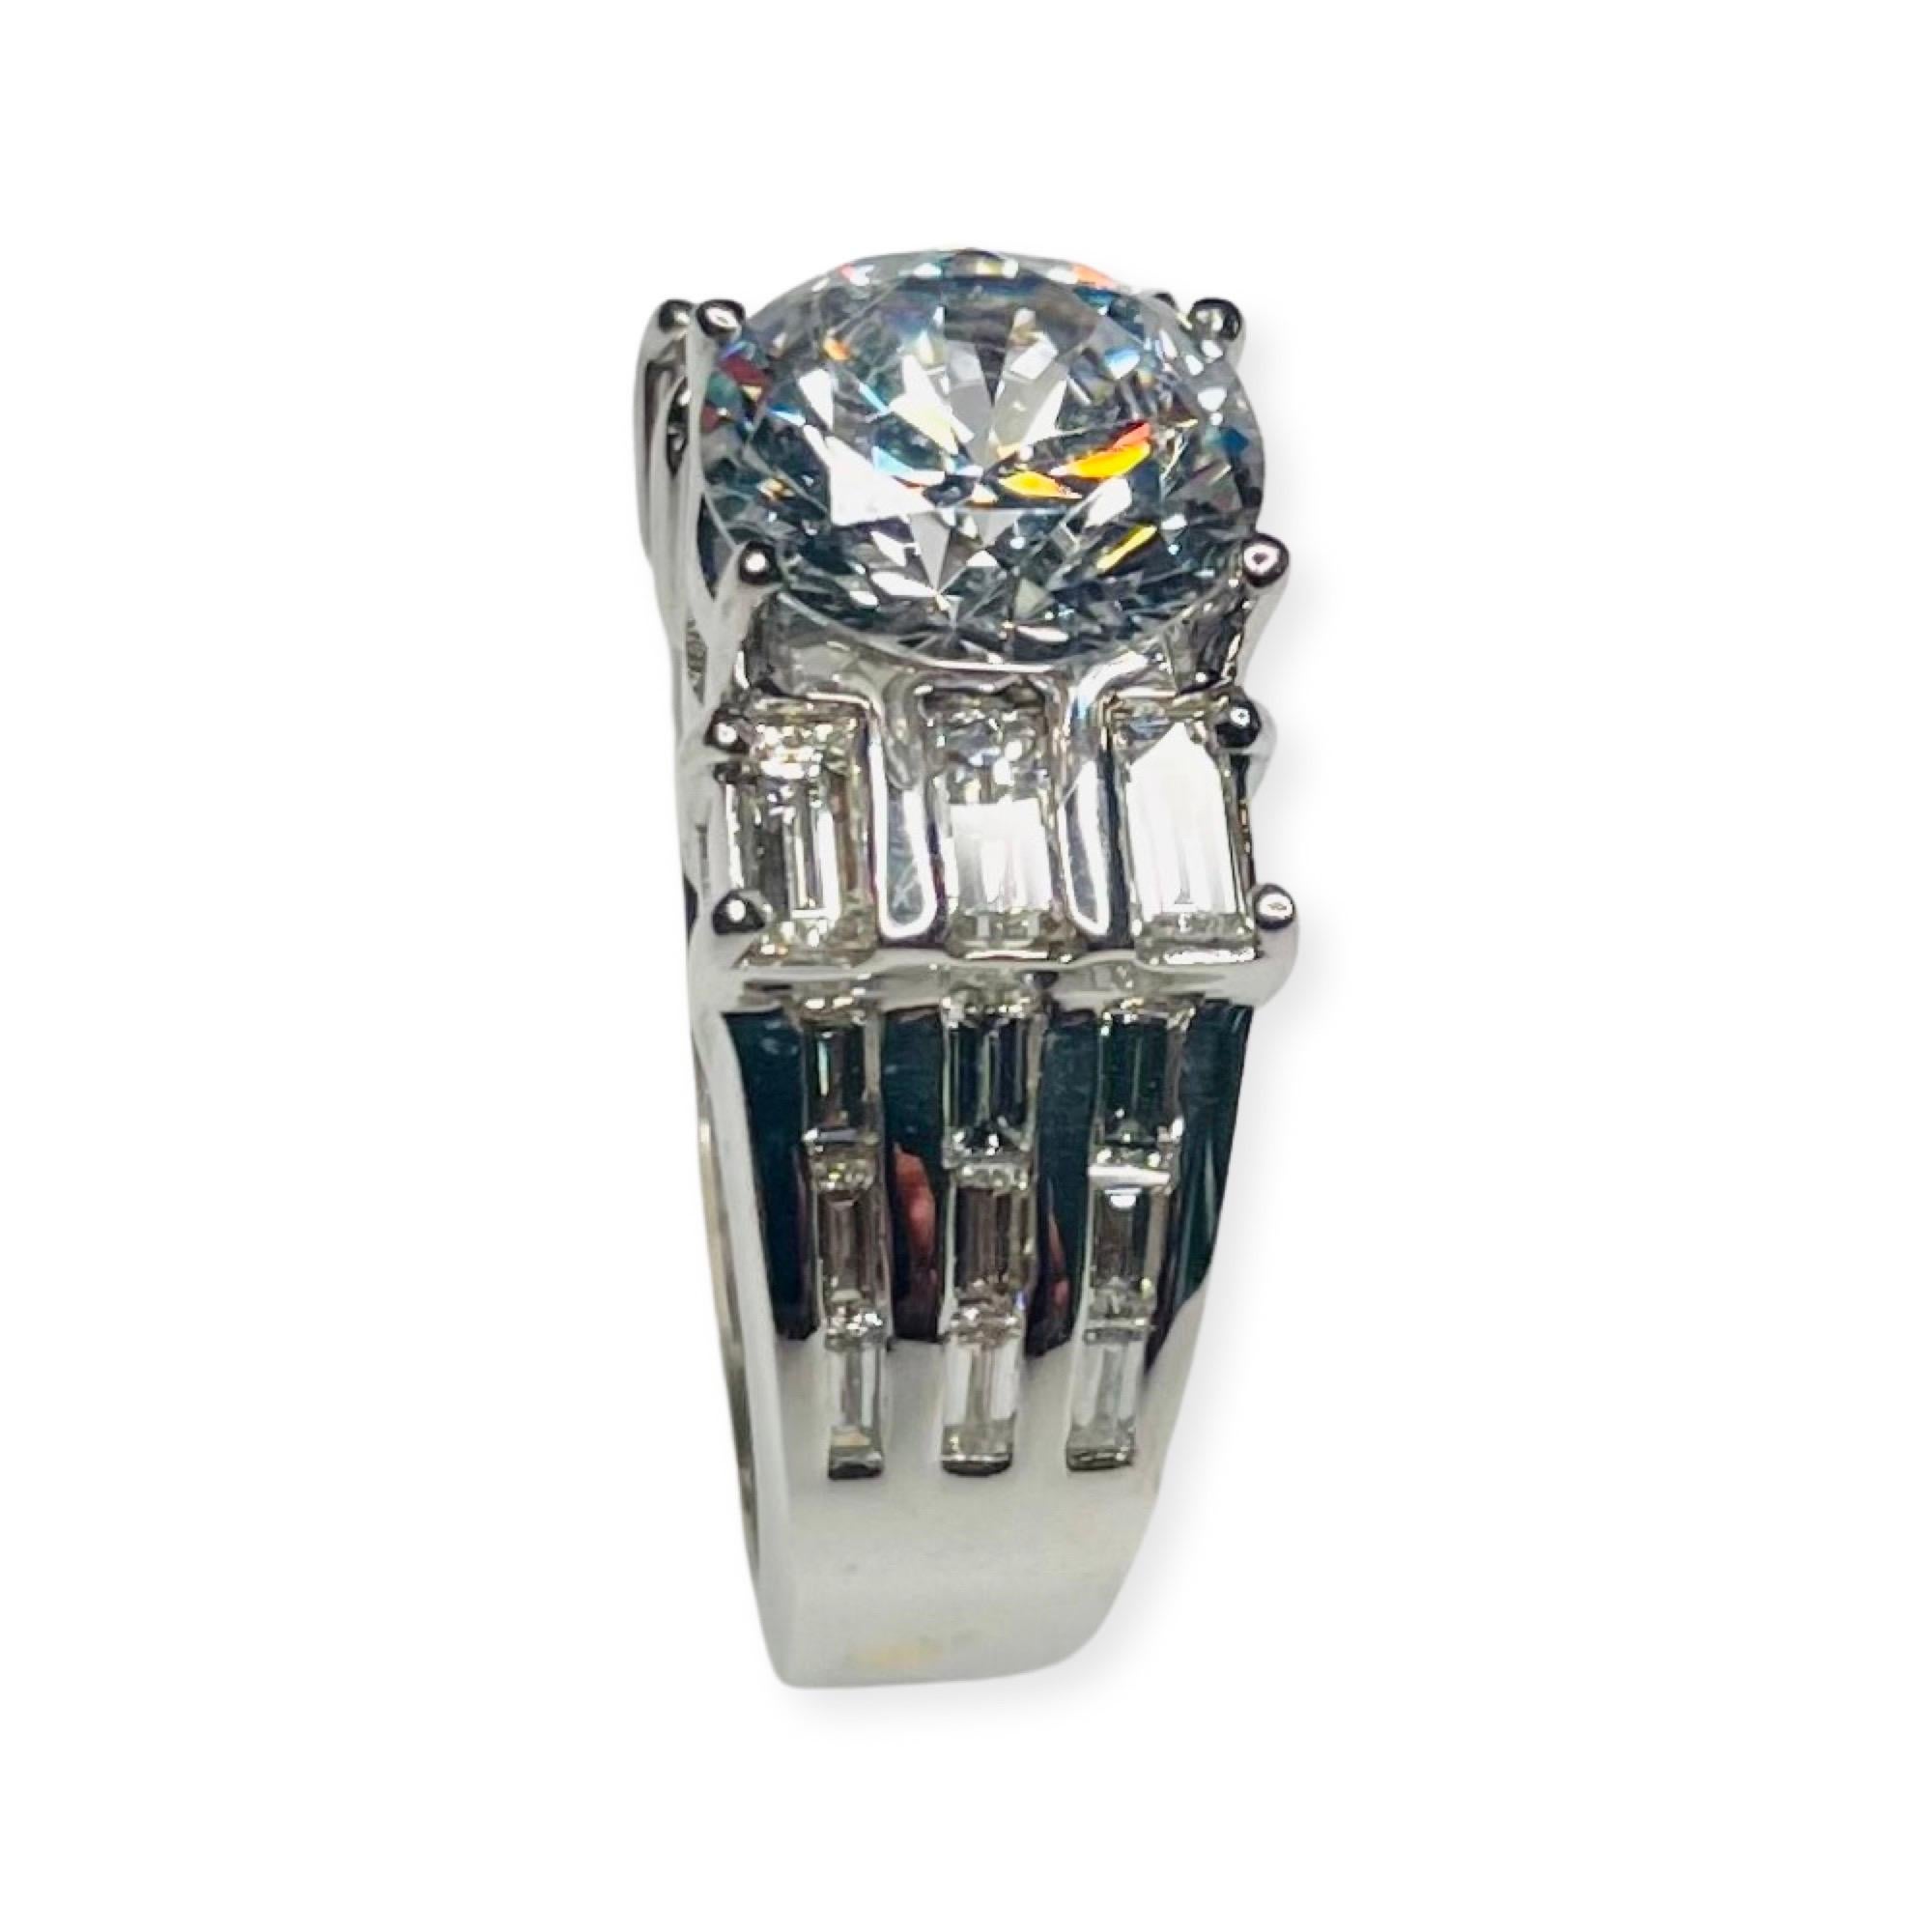 Bergio 18K White Gold Diamond Engagement Ring. It has a 9.0 mm cubic zirconia 4-split prong set in the center of the ring. This CZ is equivalent in size to a 3 carat diamond. This CZ can be replaced with a Moissanite, colored stone, Lab created or